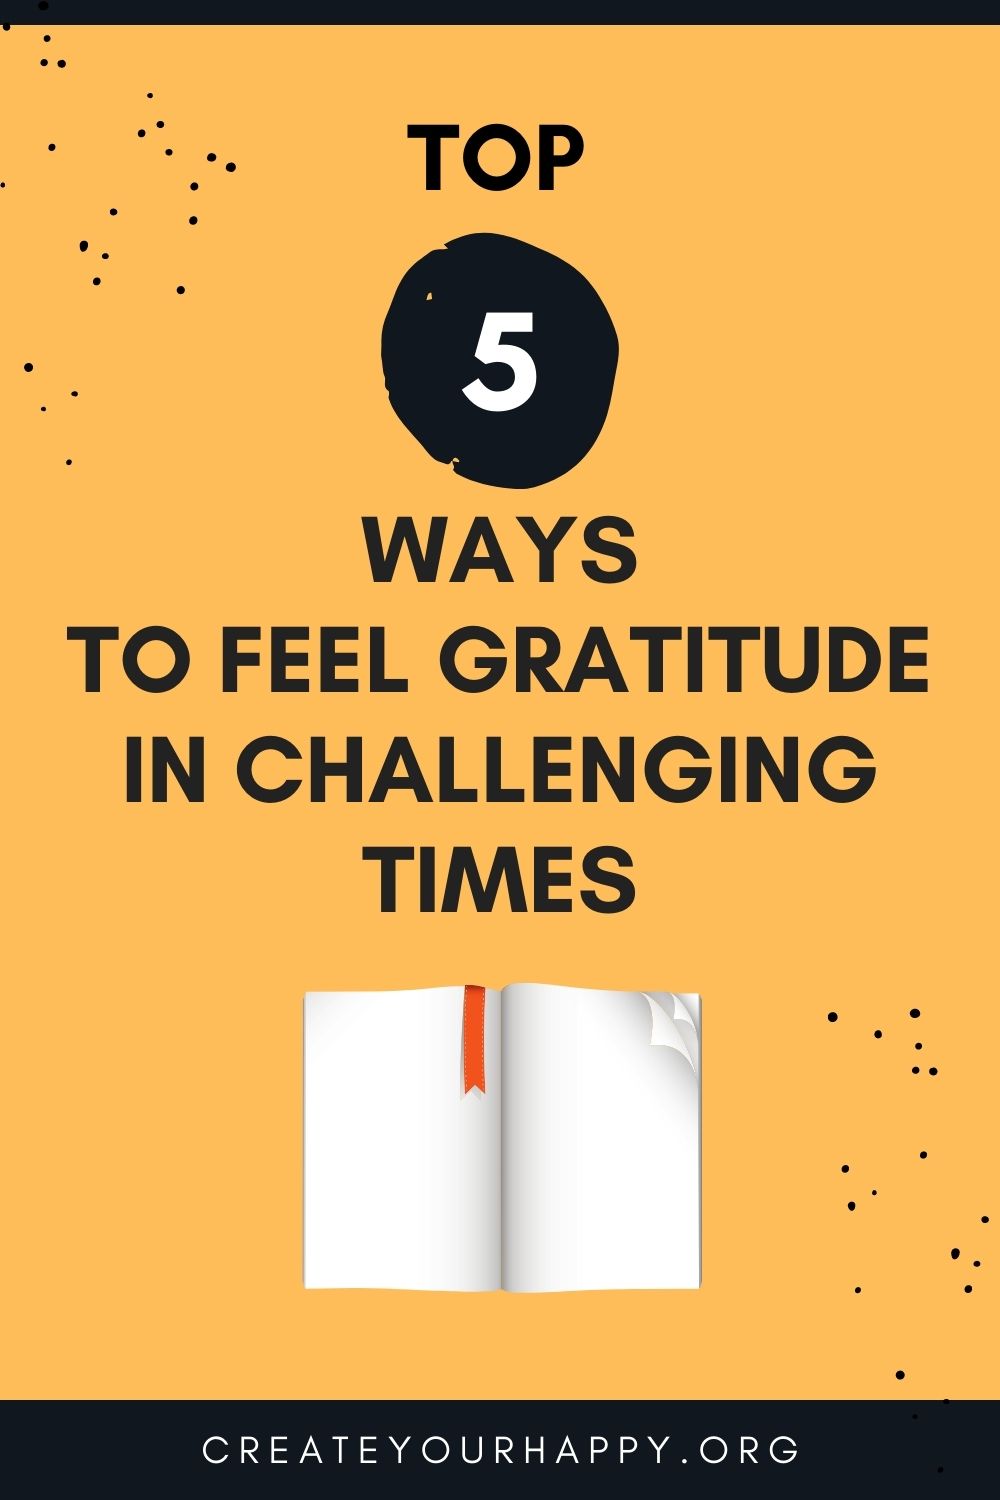 Top 5 Ways to Feel Gratitude in Challenging Times